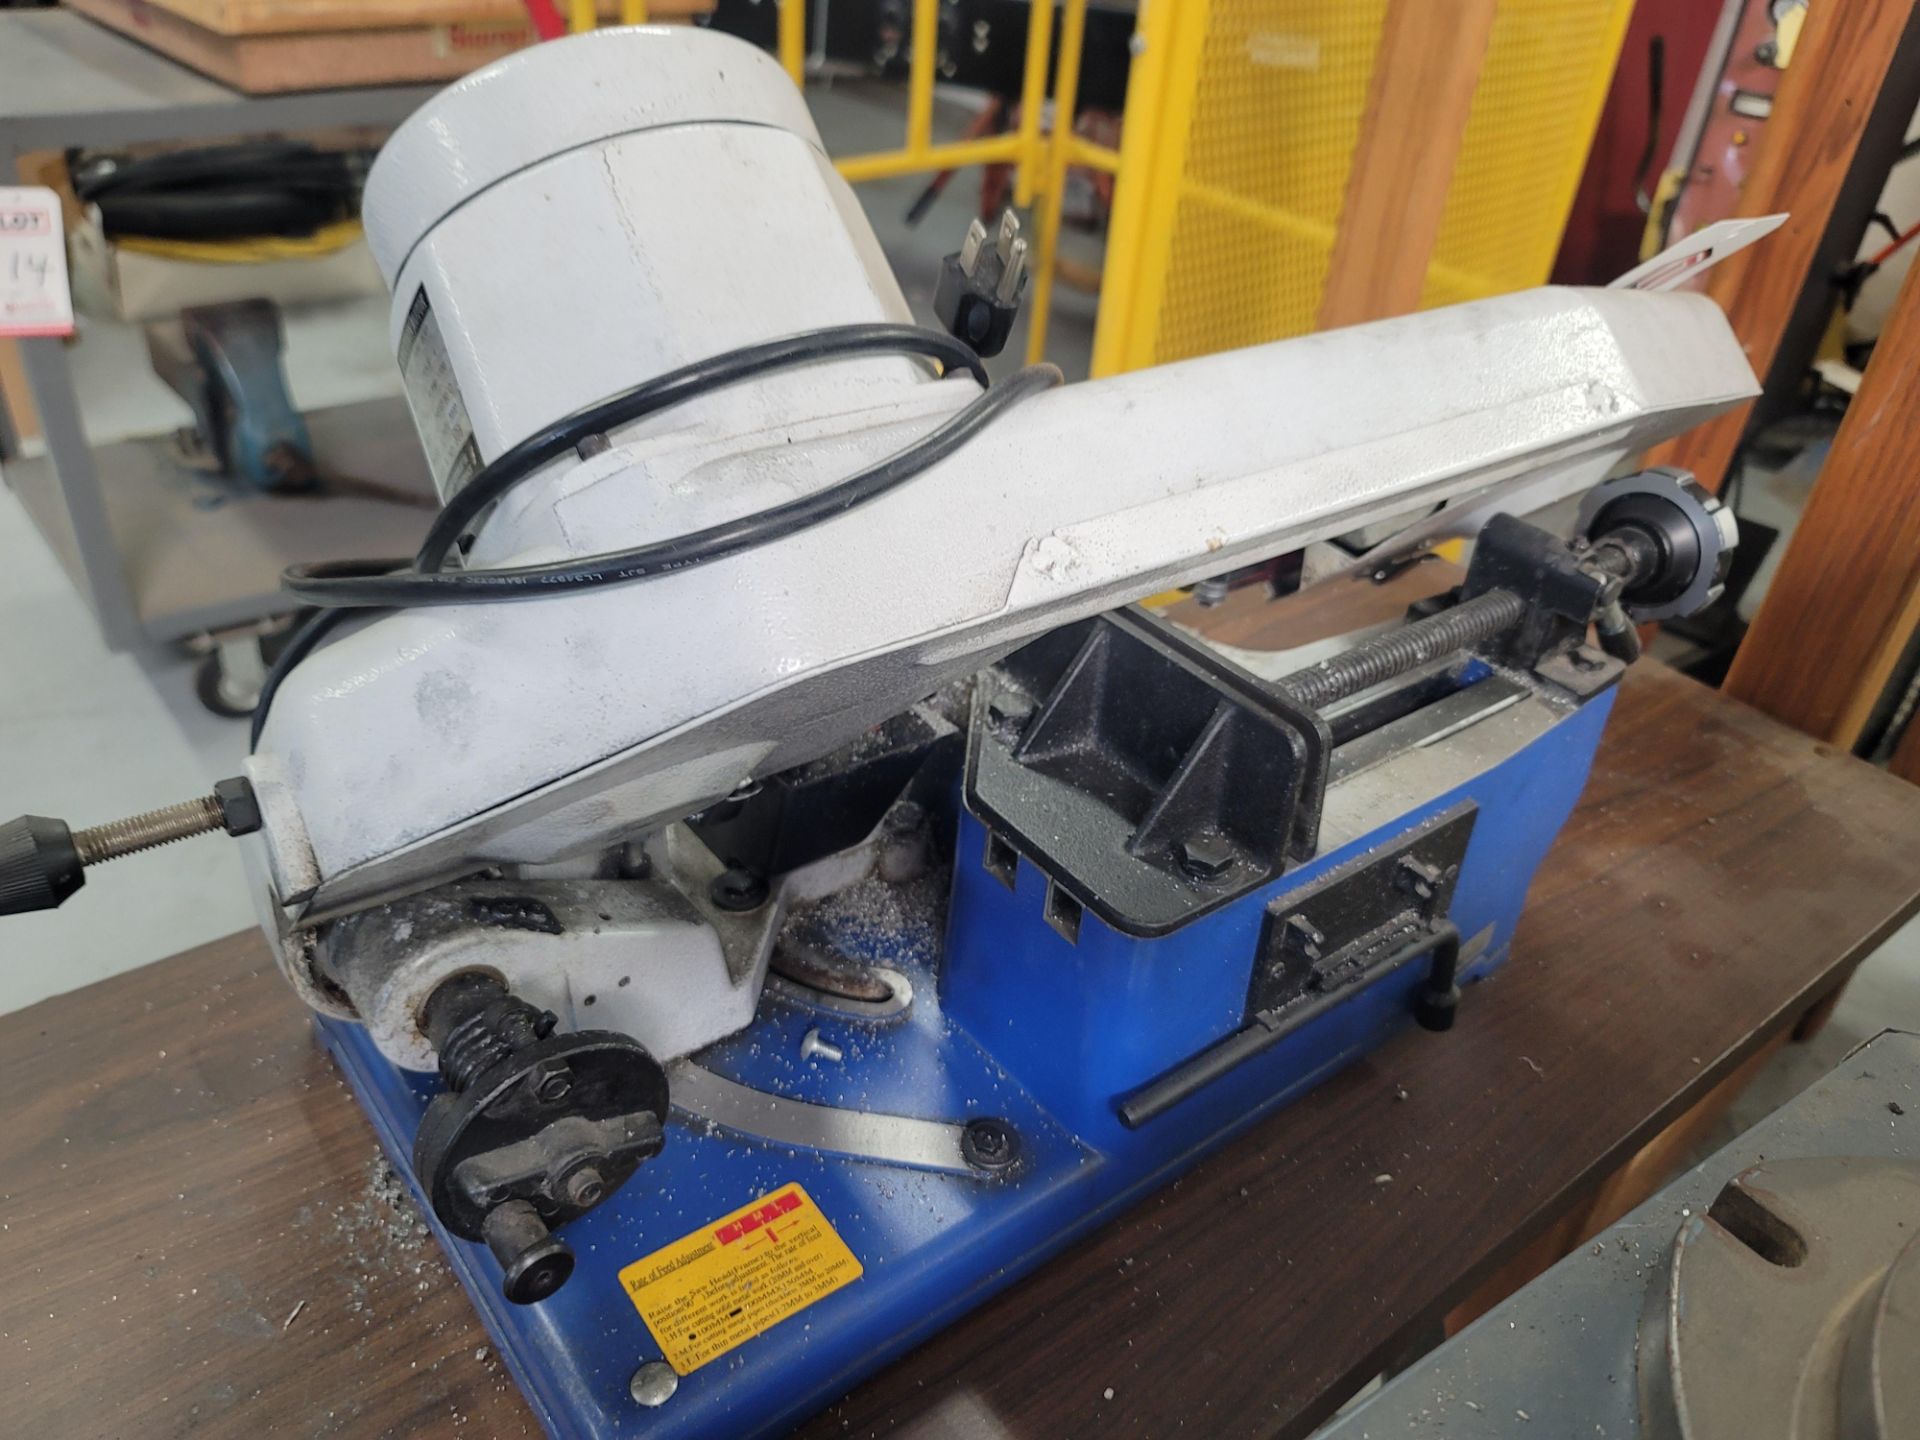 4" PORTABLE BAND SAW, MODEL UE-100S, S/N 003164, W/ STAND - Image 3 of 3